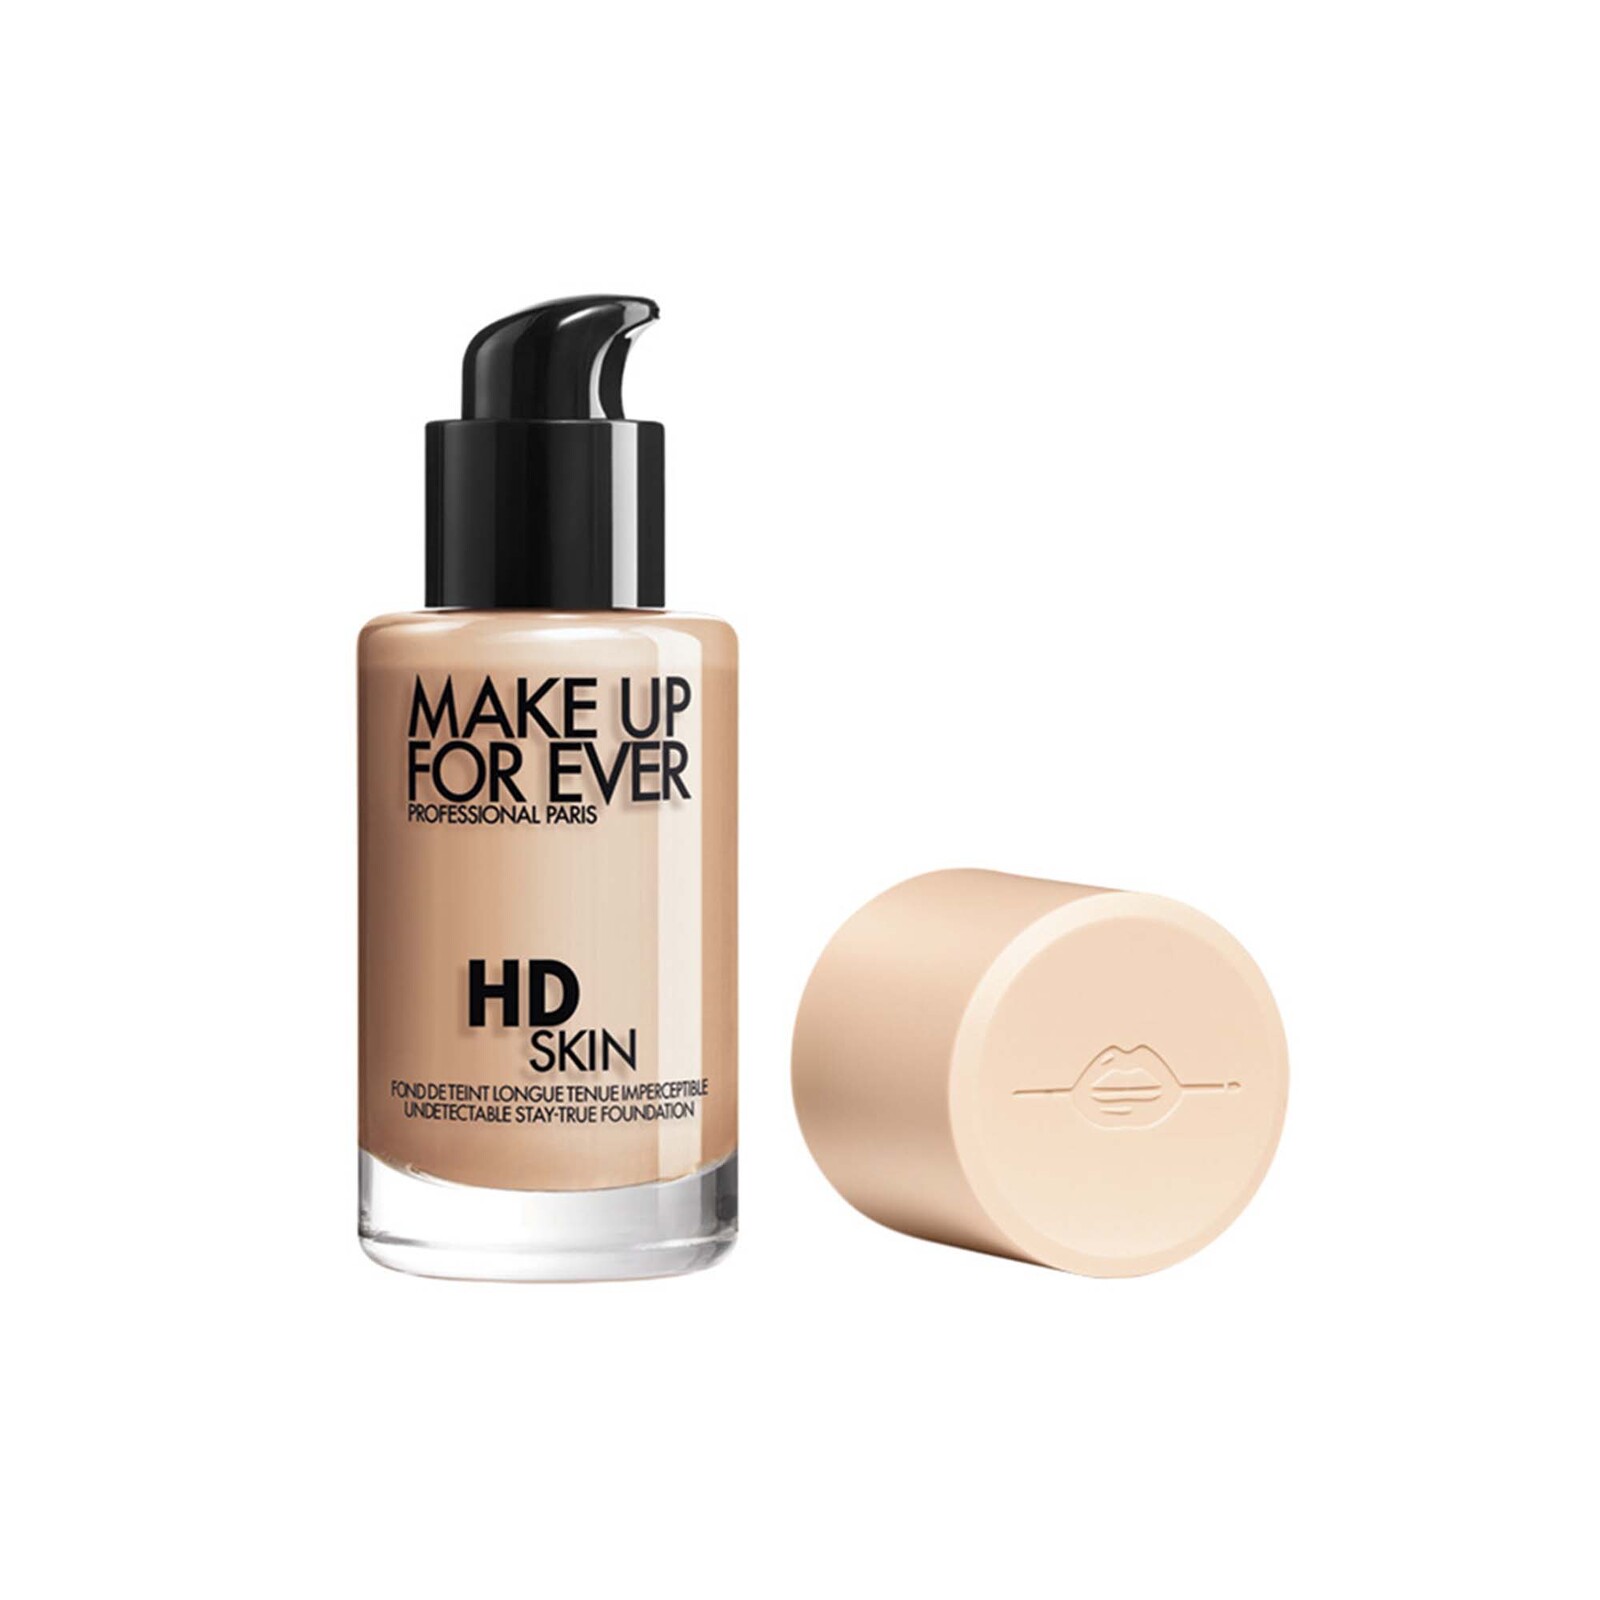 Make Up For Ever Hd Skin Foundation 30Ml 1R12 Cool Ivory  